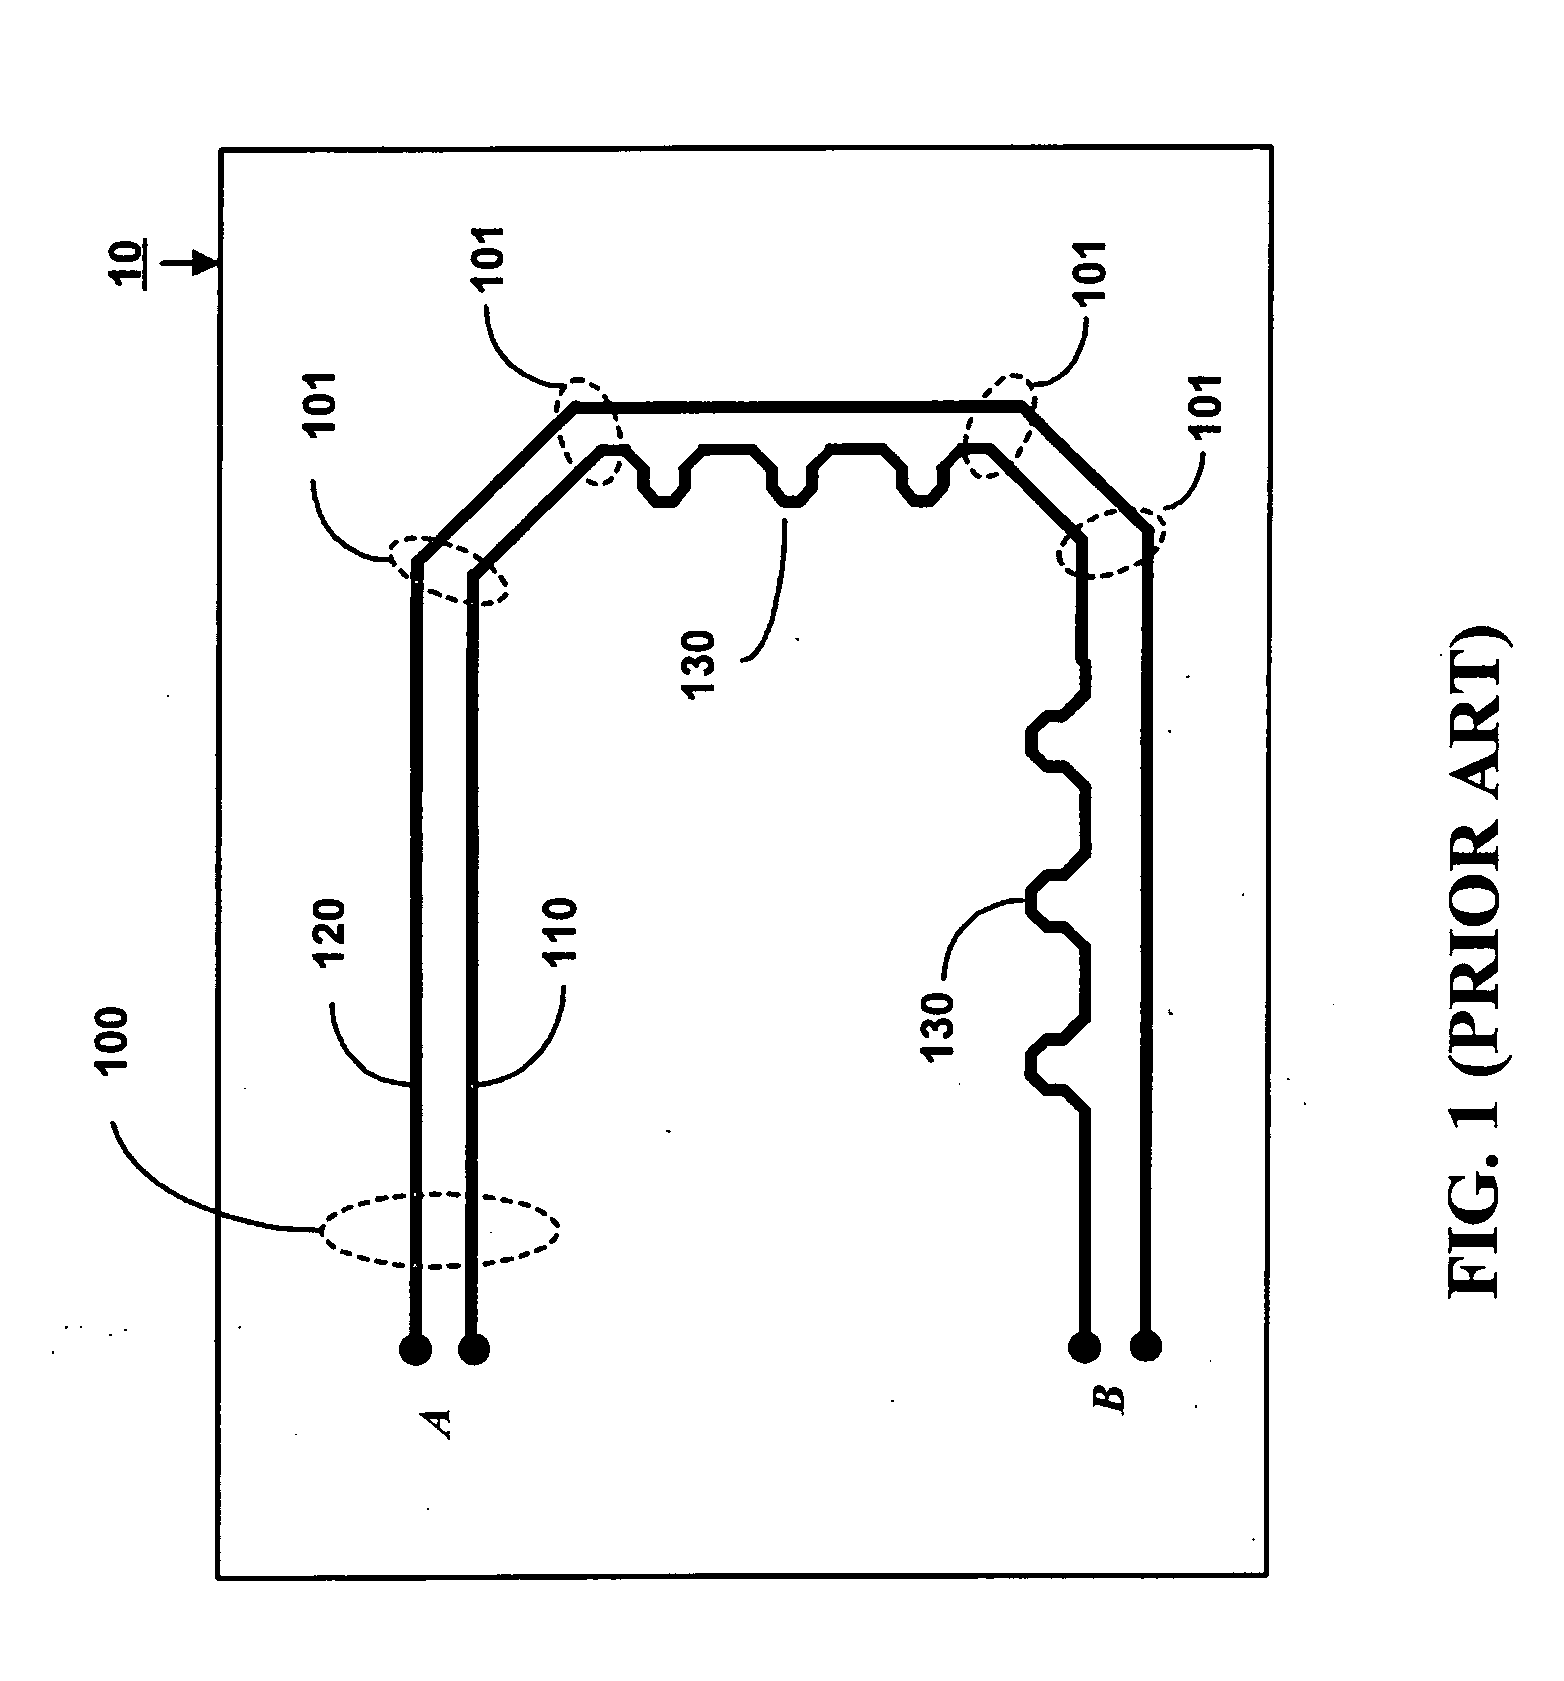 Capacitance-compensated differential circuit line layout structure